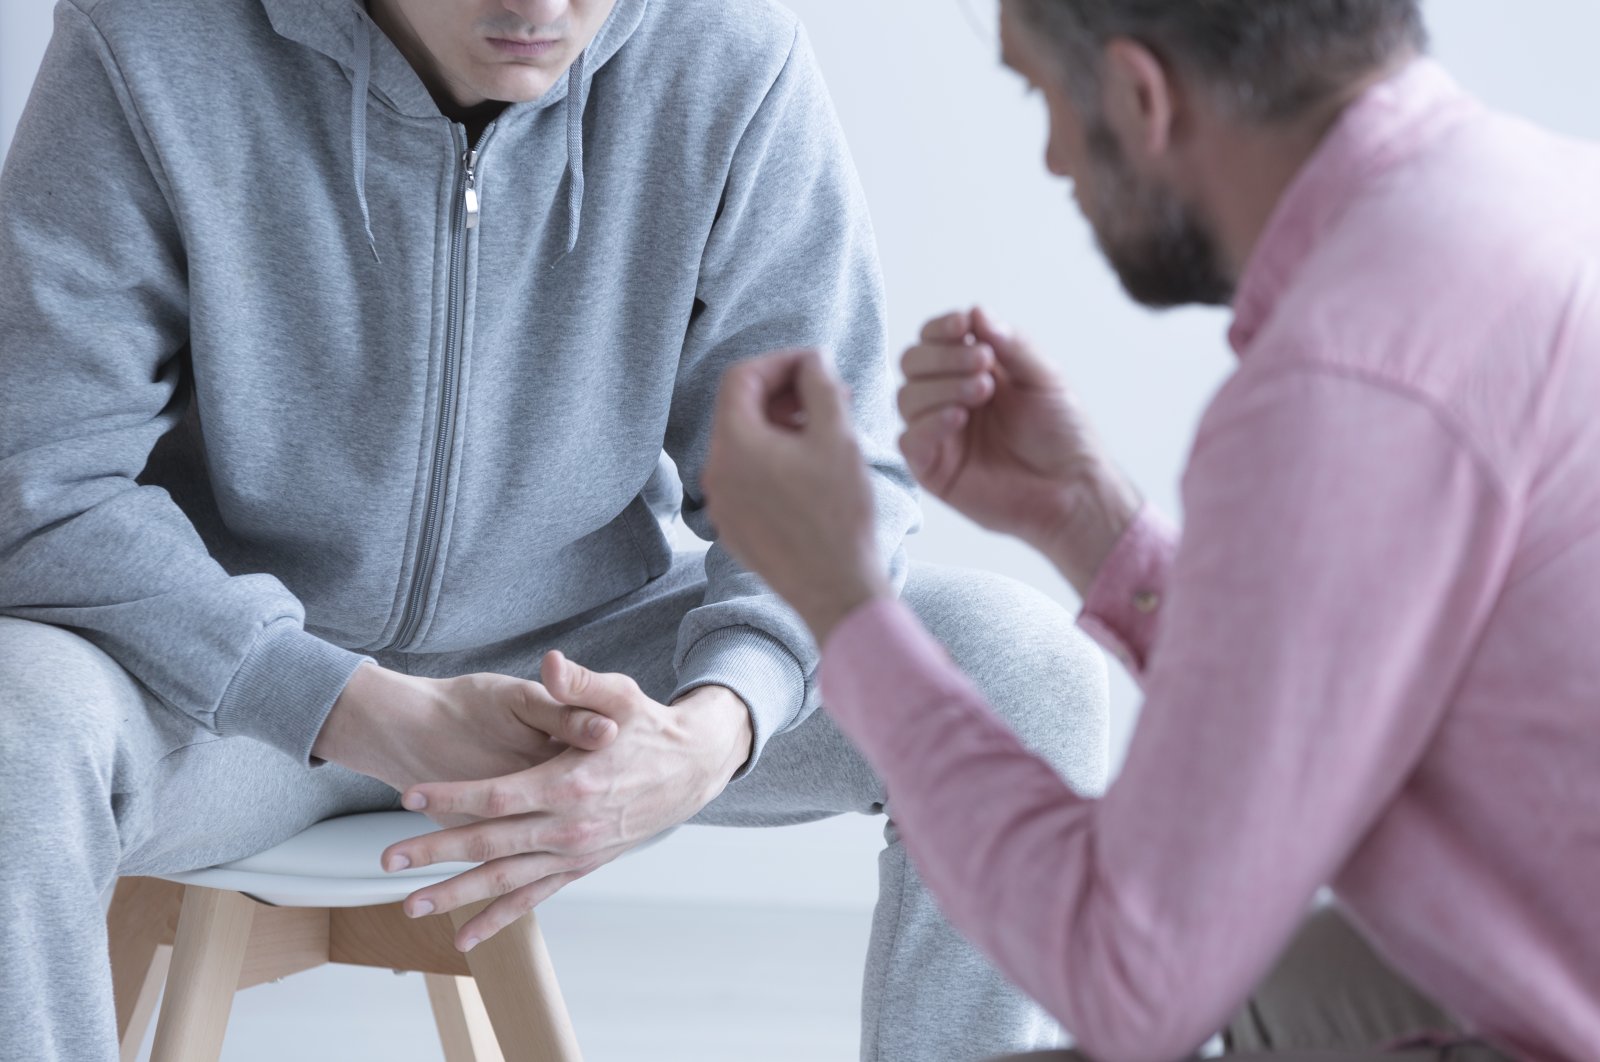 The pandemic is not solely to blame for adolescents' problems, but it exposes existing issues, therapist Fatih Pulat says. (Shutterstock Photo)